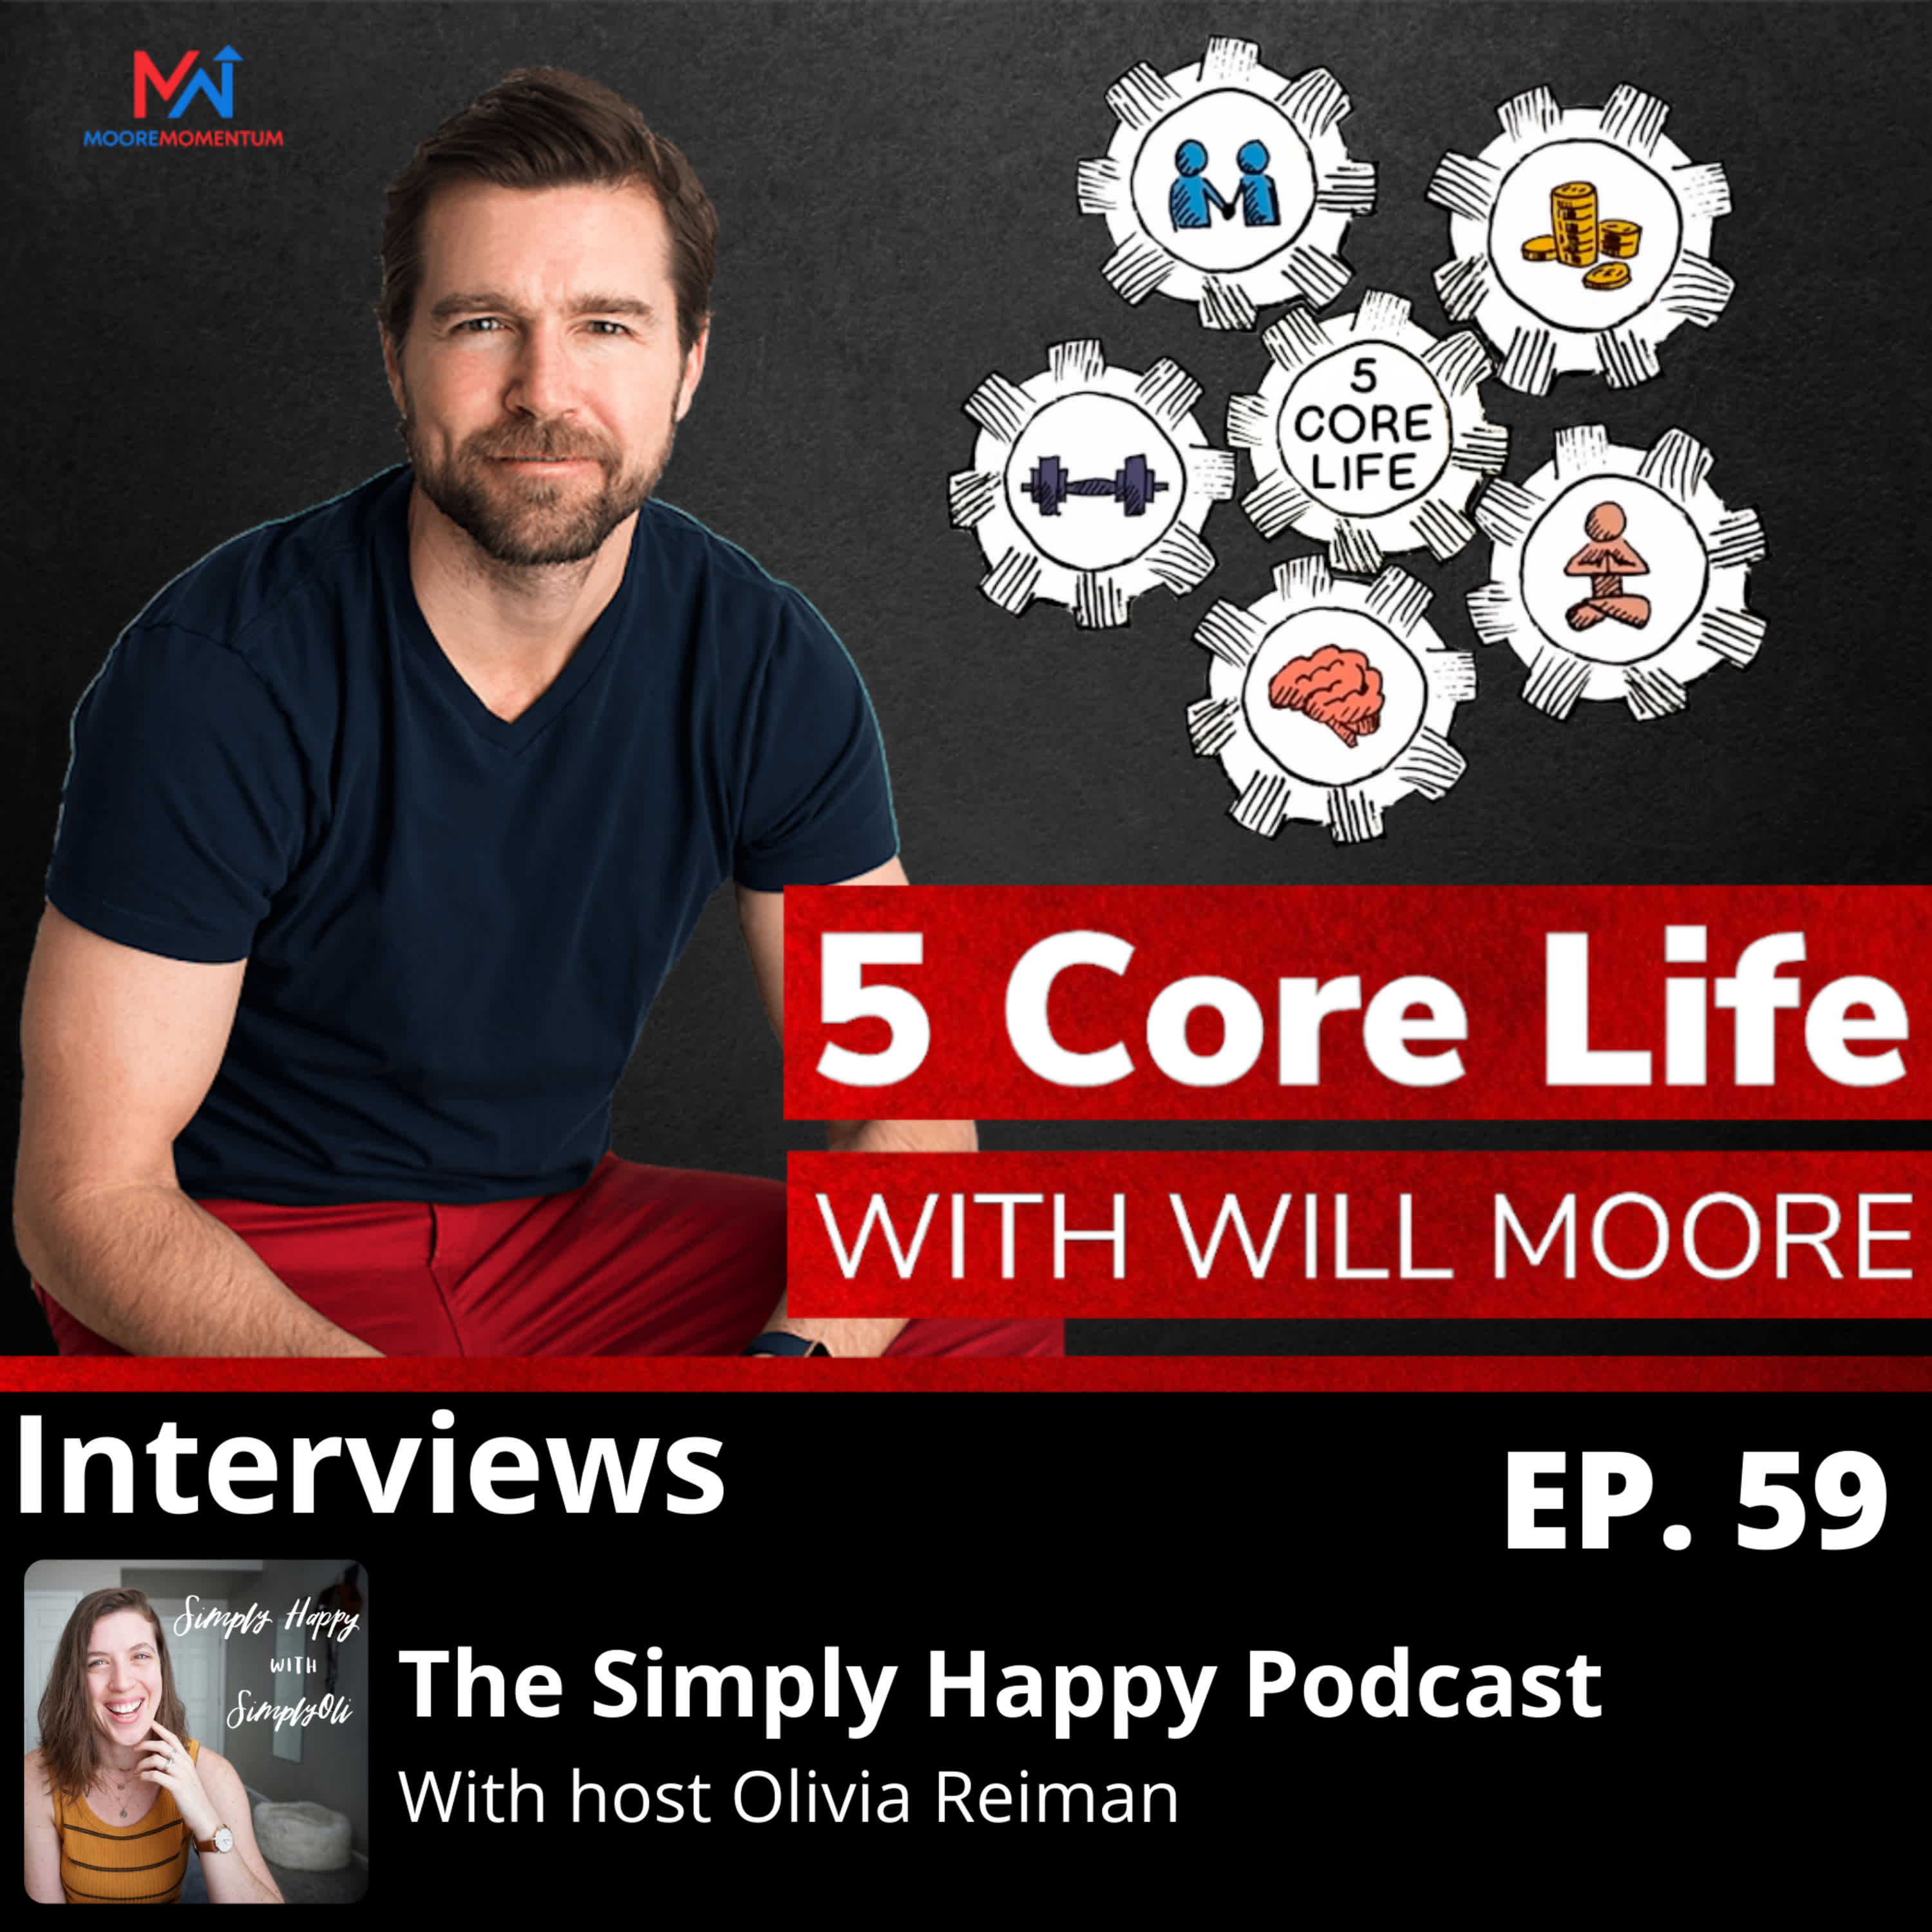 Connecting to Your Why, an Interview on The Simply Happy Podcast with Olivia Reiman